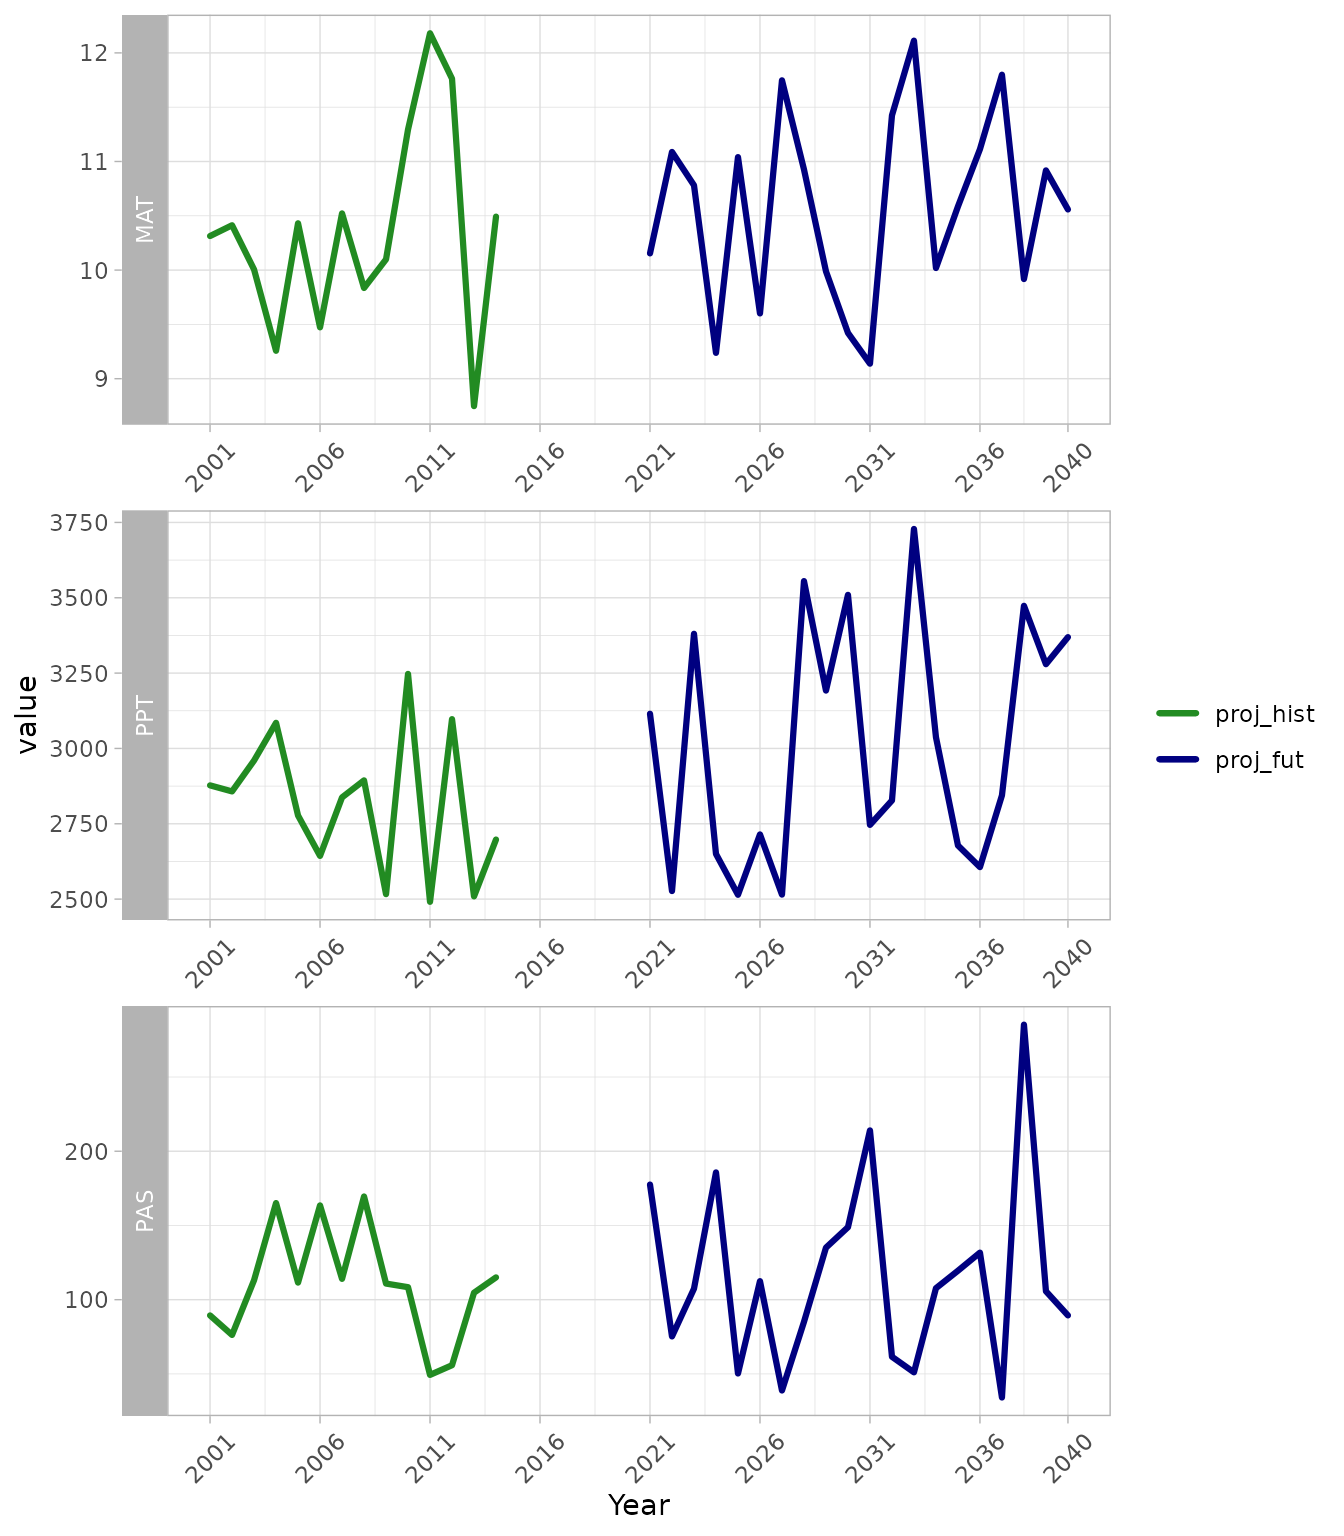 Time series outputs from `downscale`. Pannels show mean annual temperature (MAT), total annual precipitation (PPT) and precipitation as snow (PAS). Line colours refer to observed historic values (grey), projected historic values (gren) and future projected values (blue) for a single location, GCM, emissions scenario and model run.